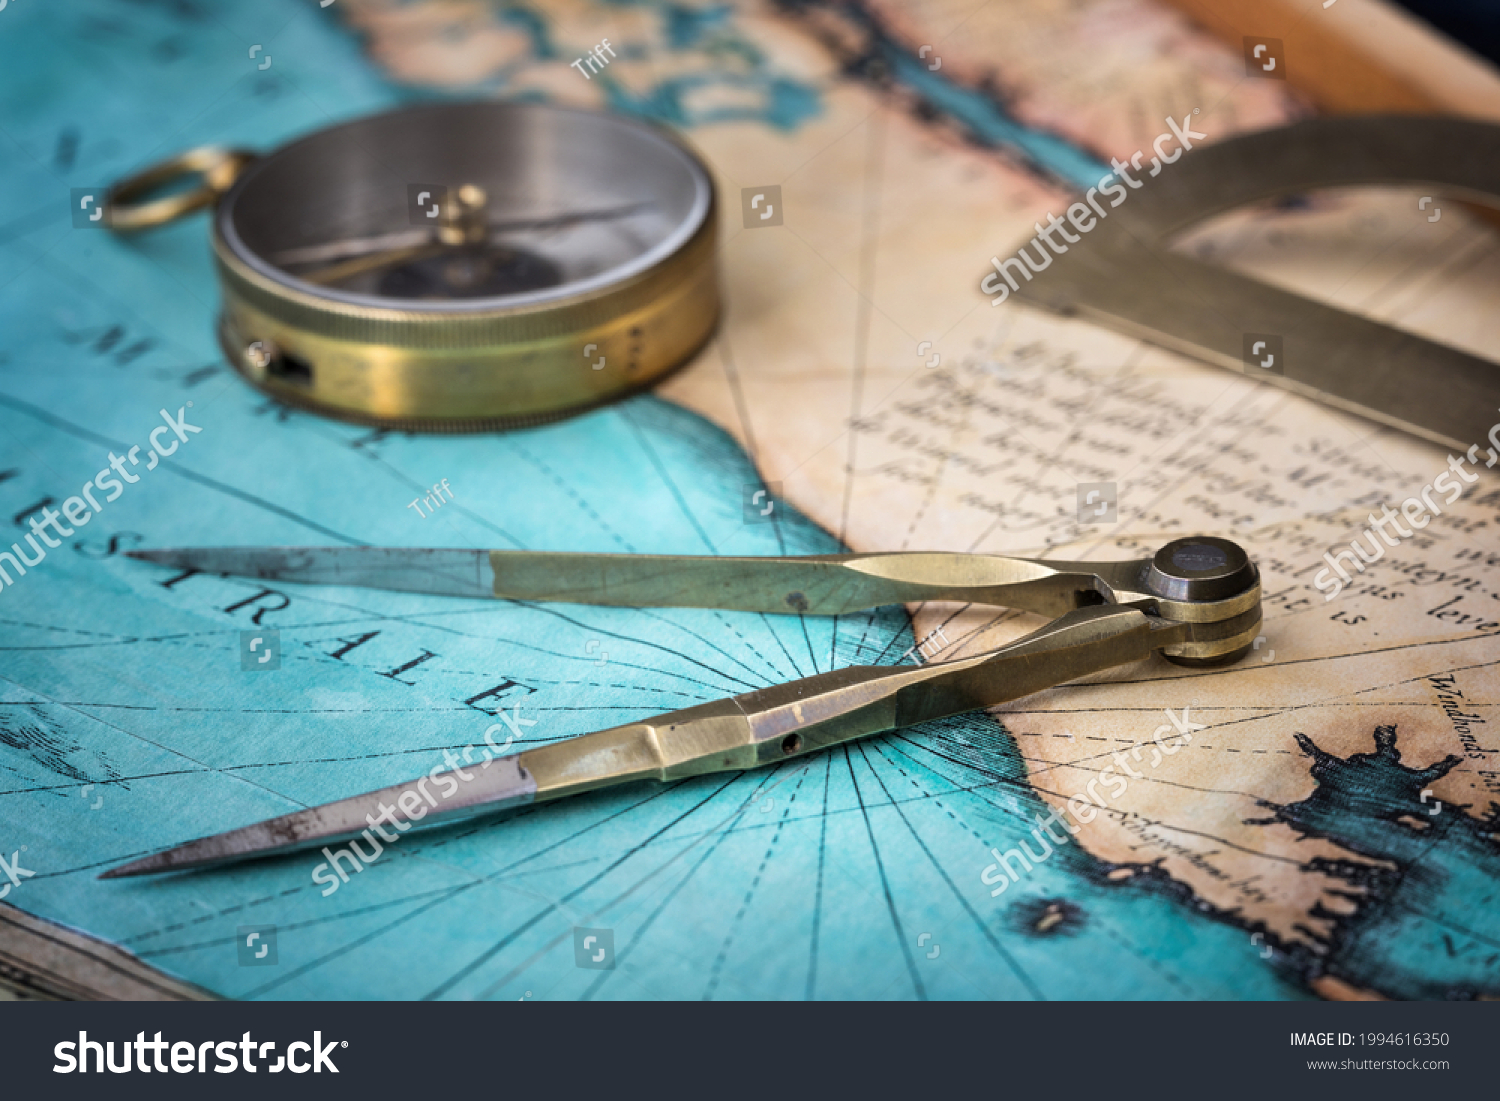 An old geographic map with navigational tools: compass, divider, protractor. View of the workplace of ship's captain. Travel, geography, navigation, tourism, history and exploration concept background #1994616350